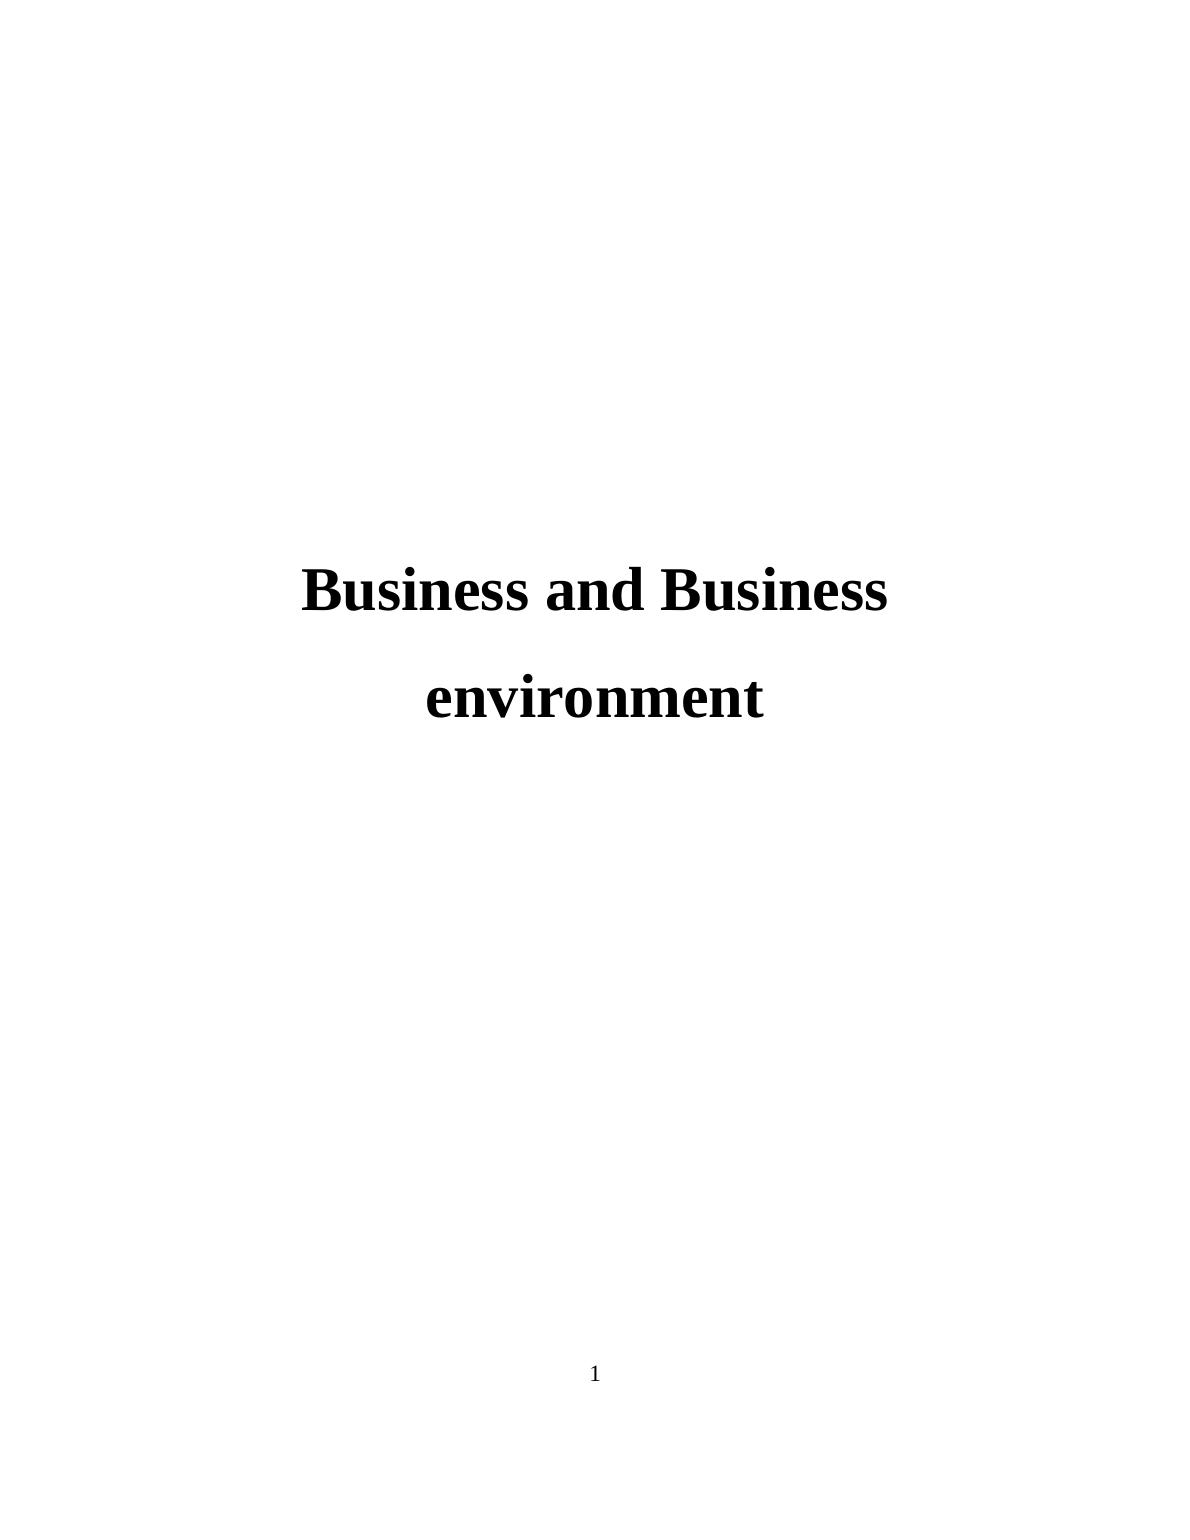 P4. Negative and Positive influence of macro environment on business activities_1